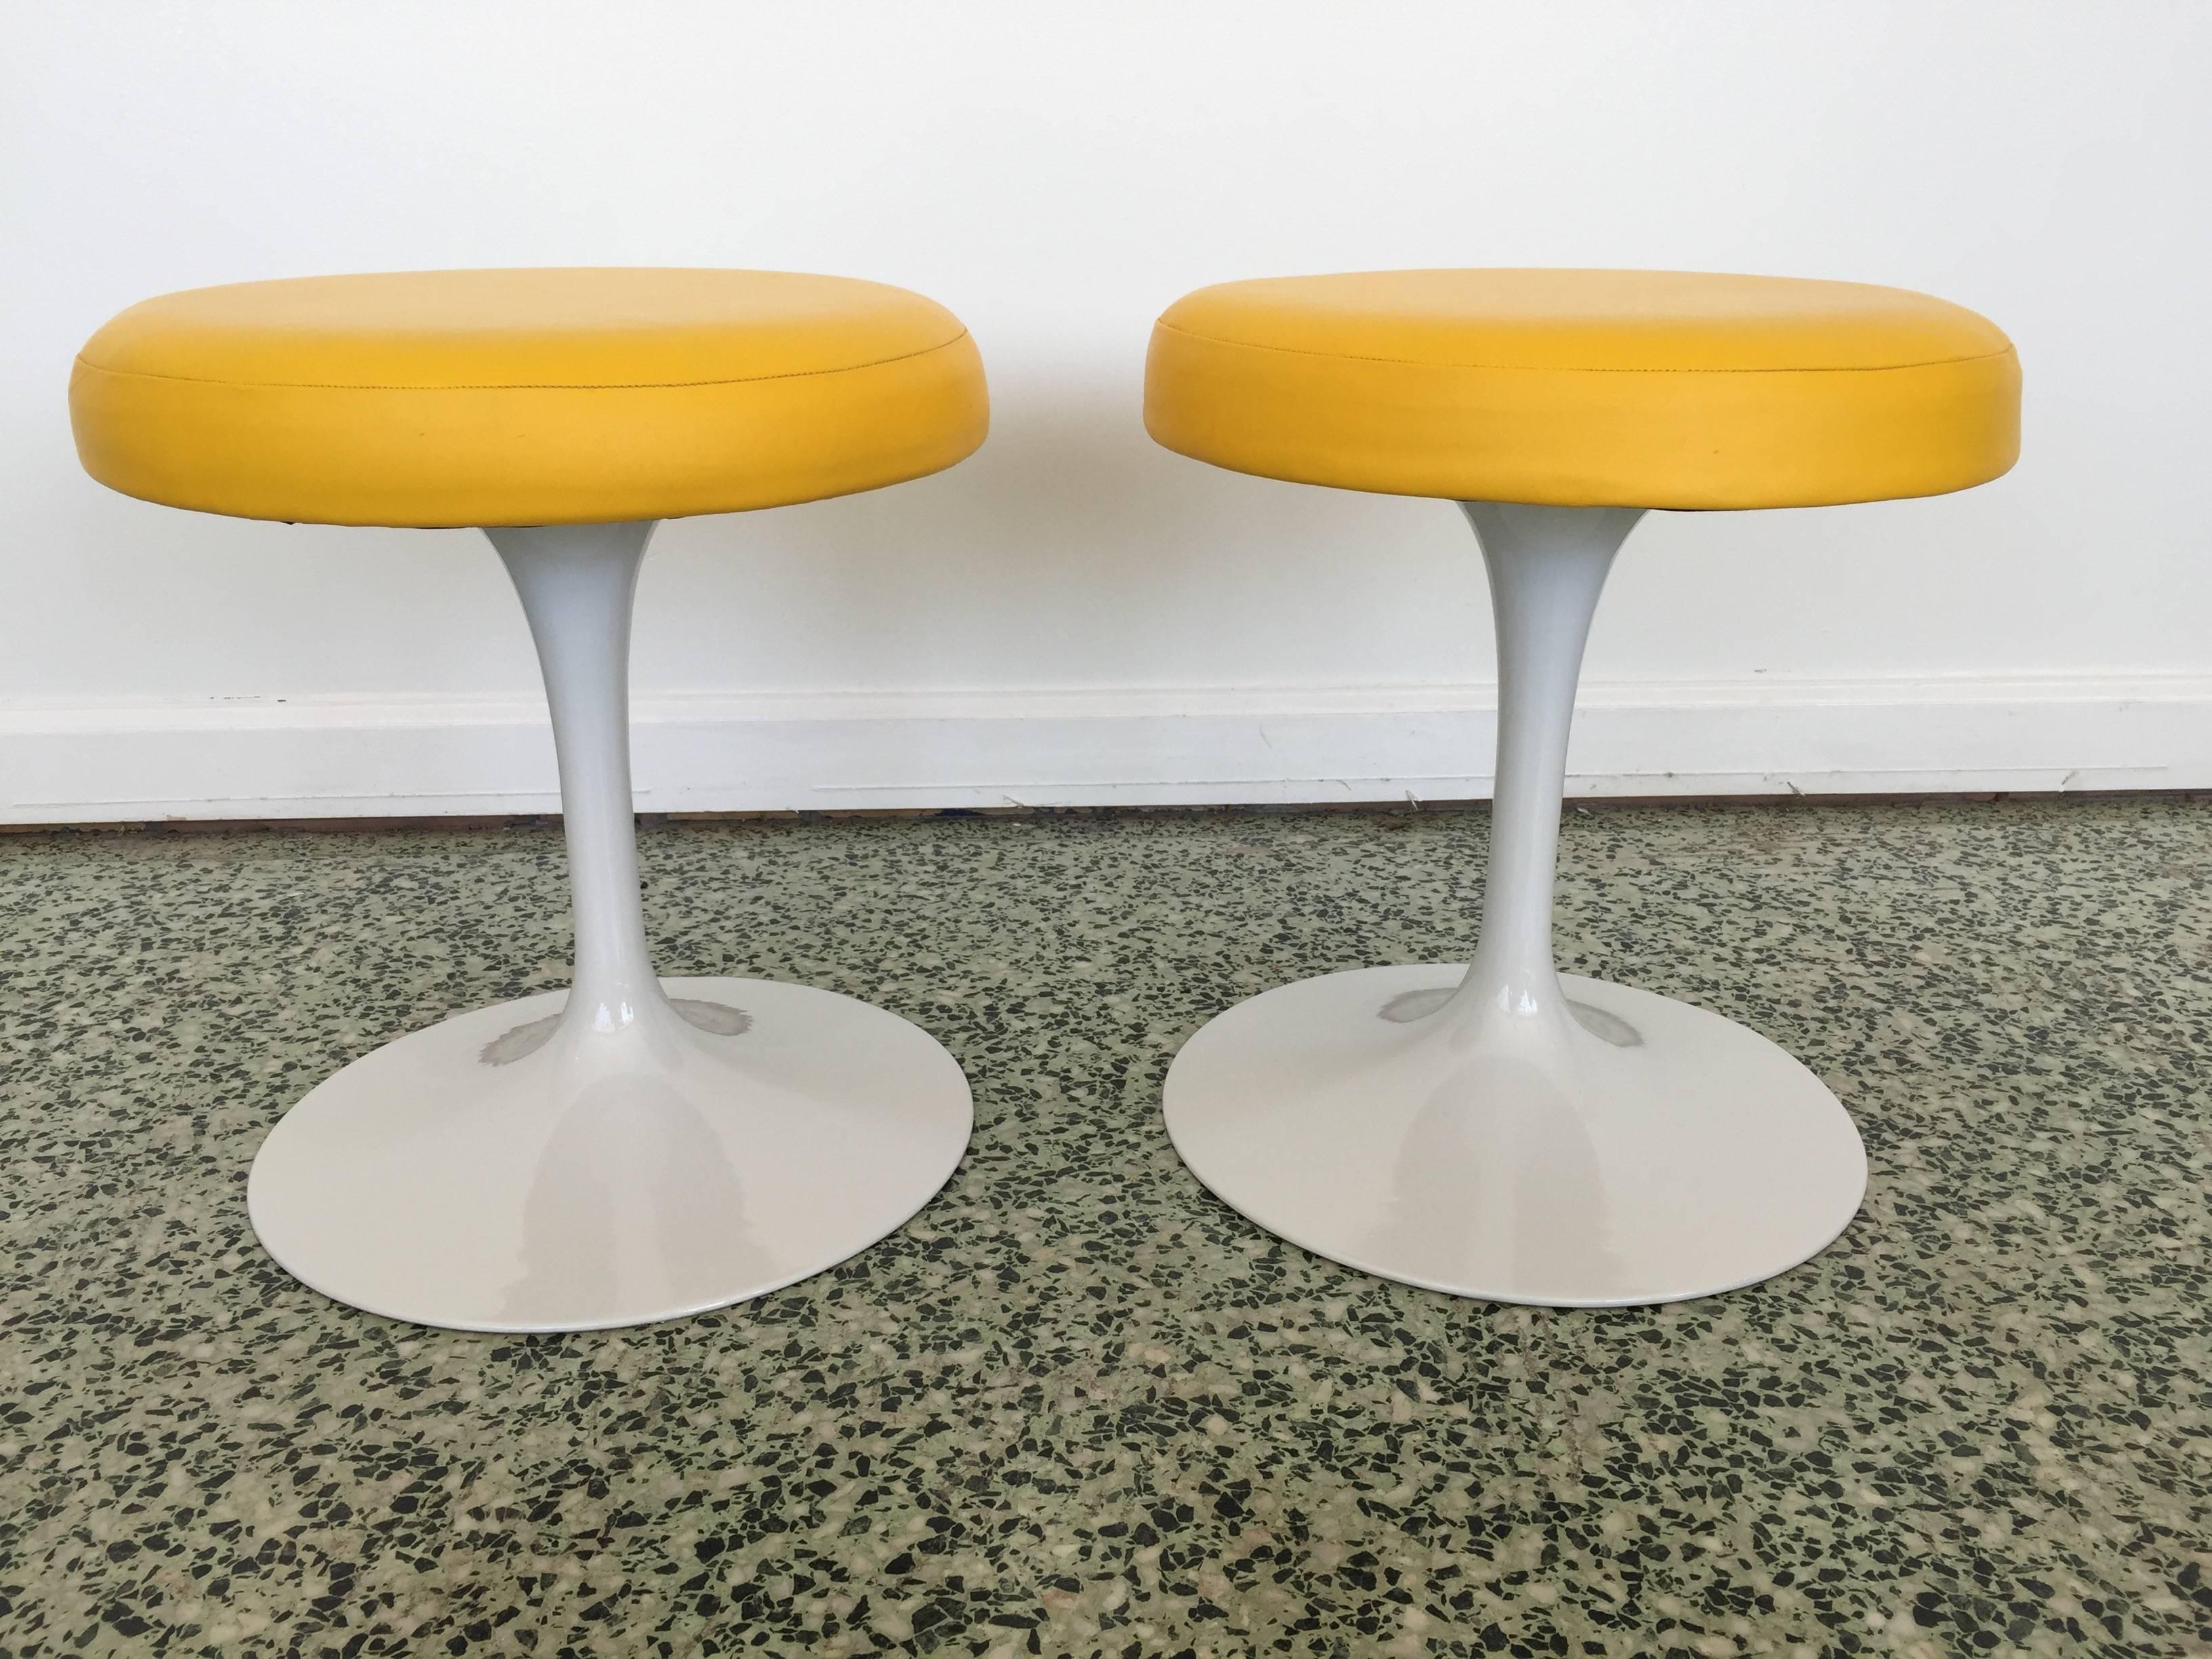 Saarinen for Knoll stools with newer upholstery and paint. Bright yellow leather.